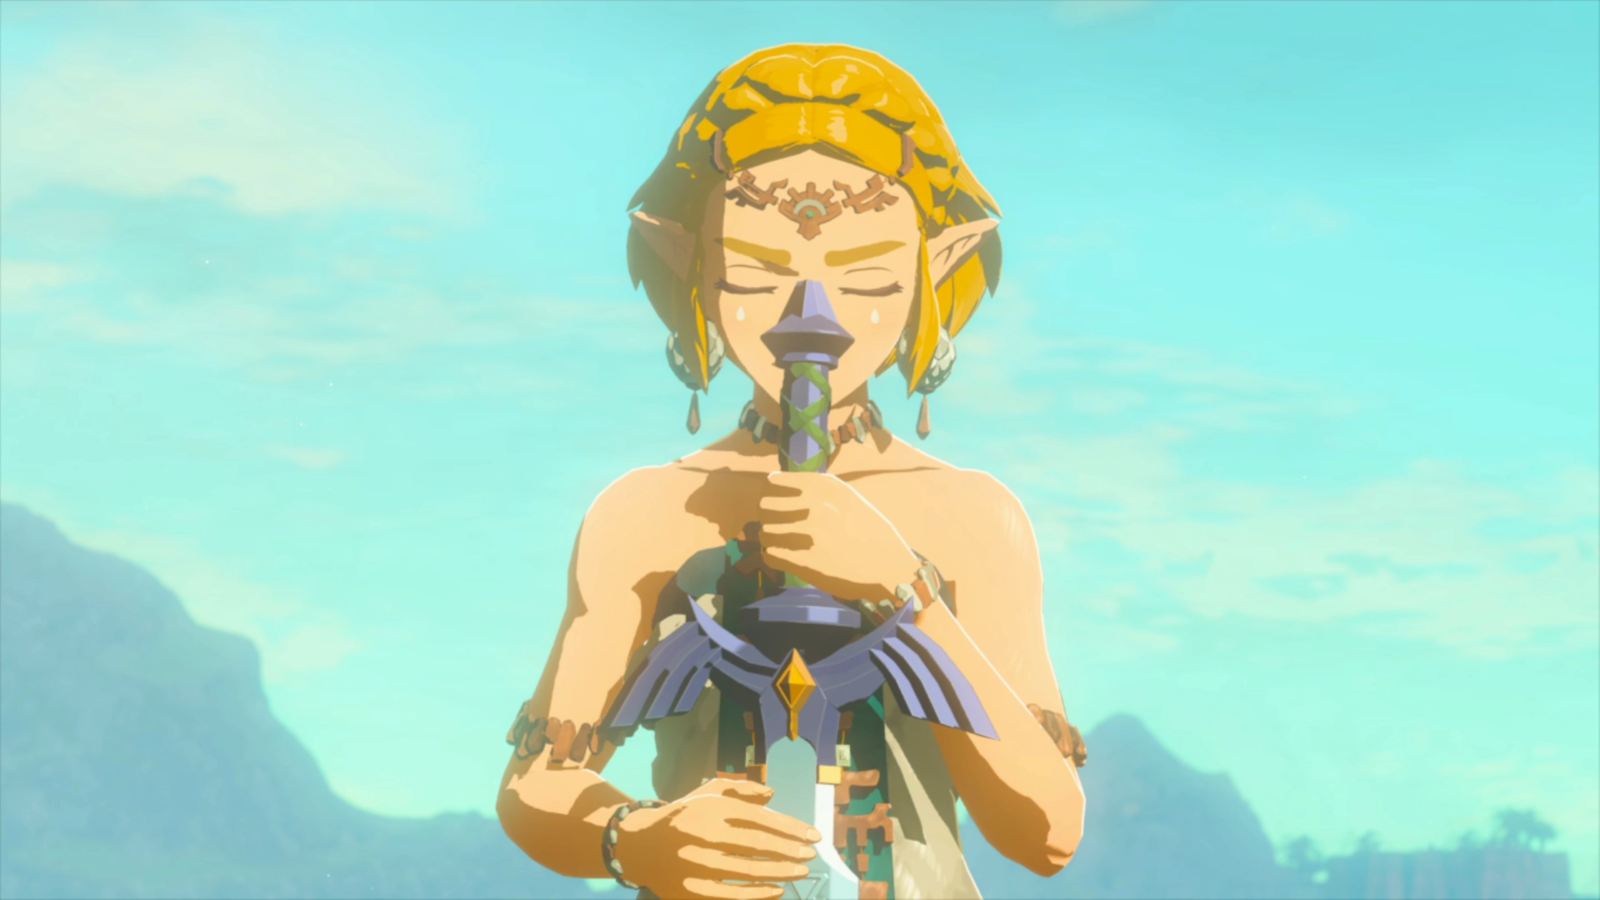 Yah know, Part of me thinks Mipha might be part Hylian. Perhaps